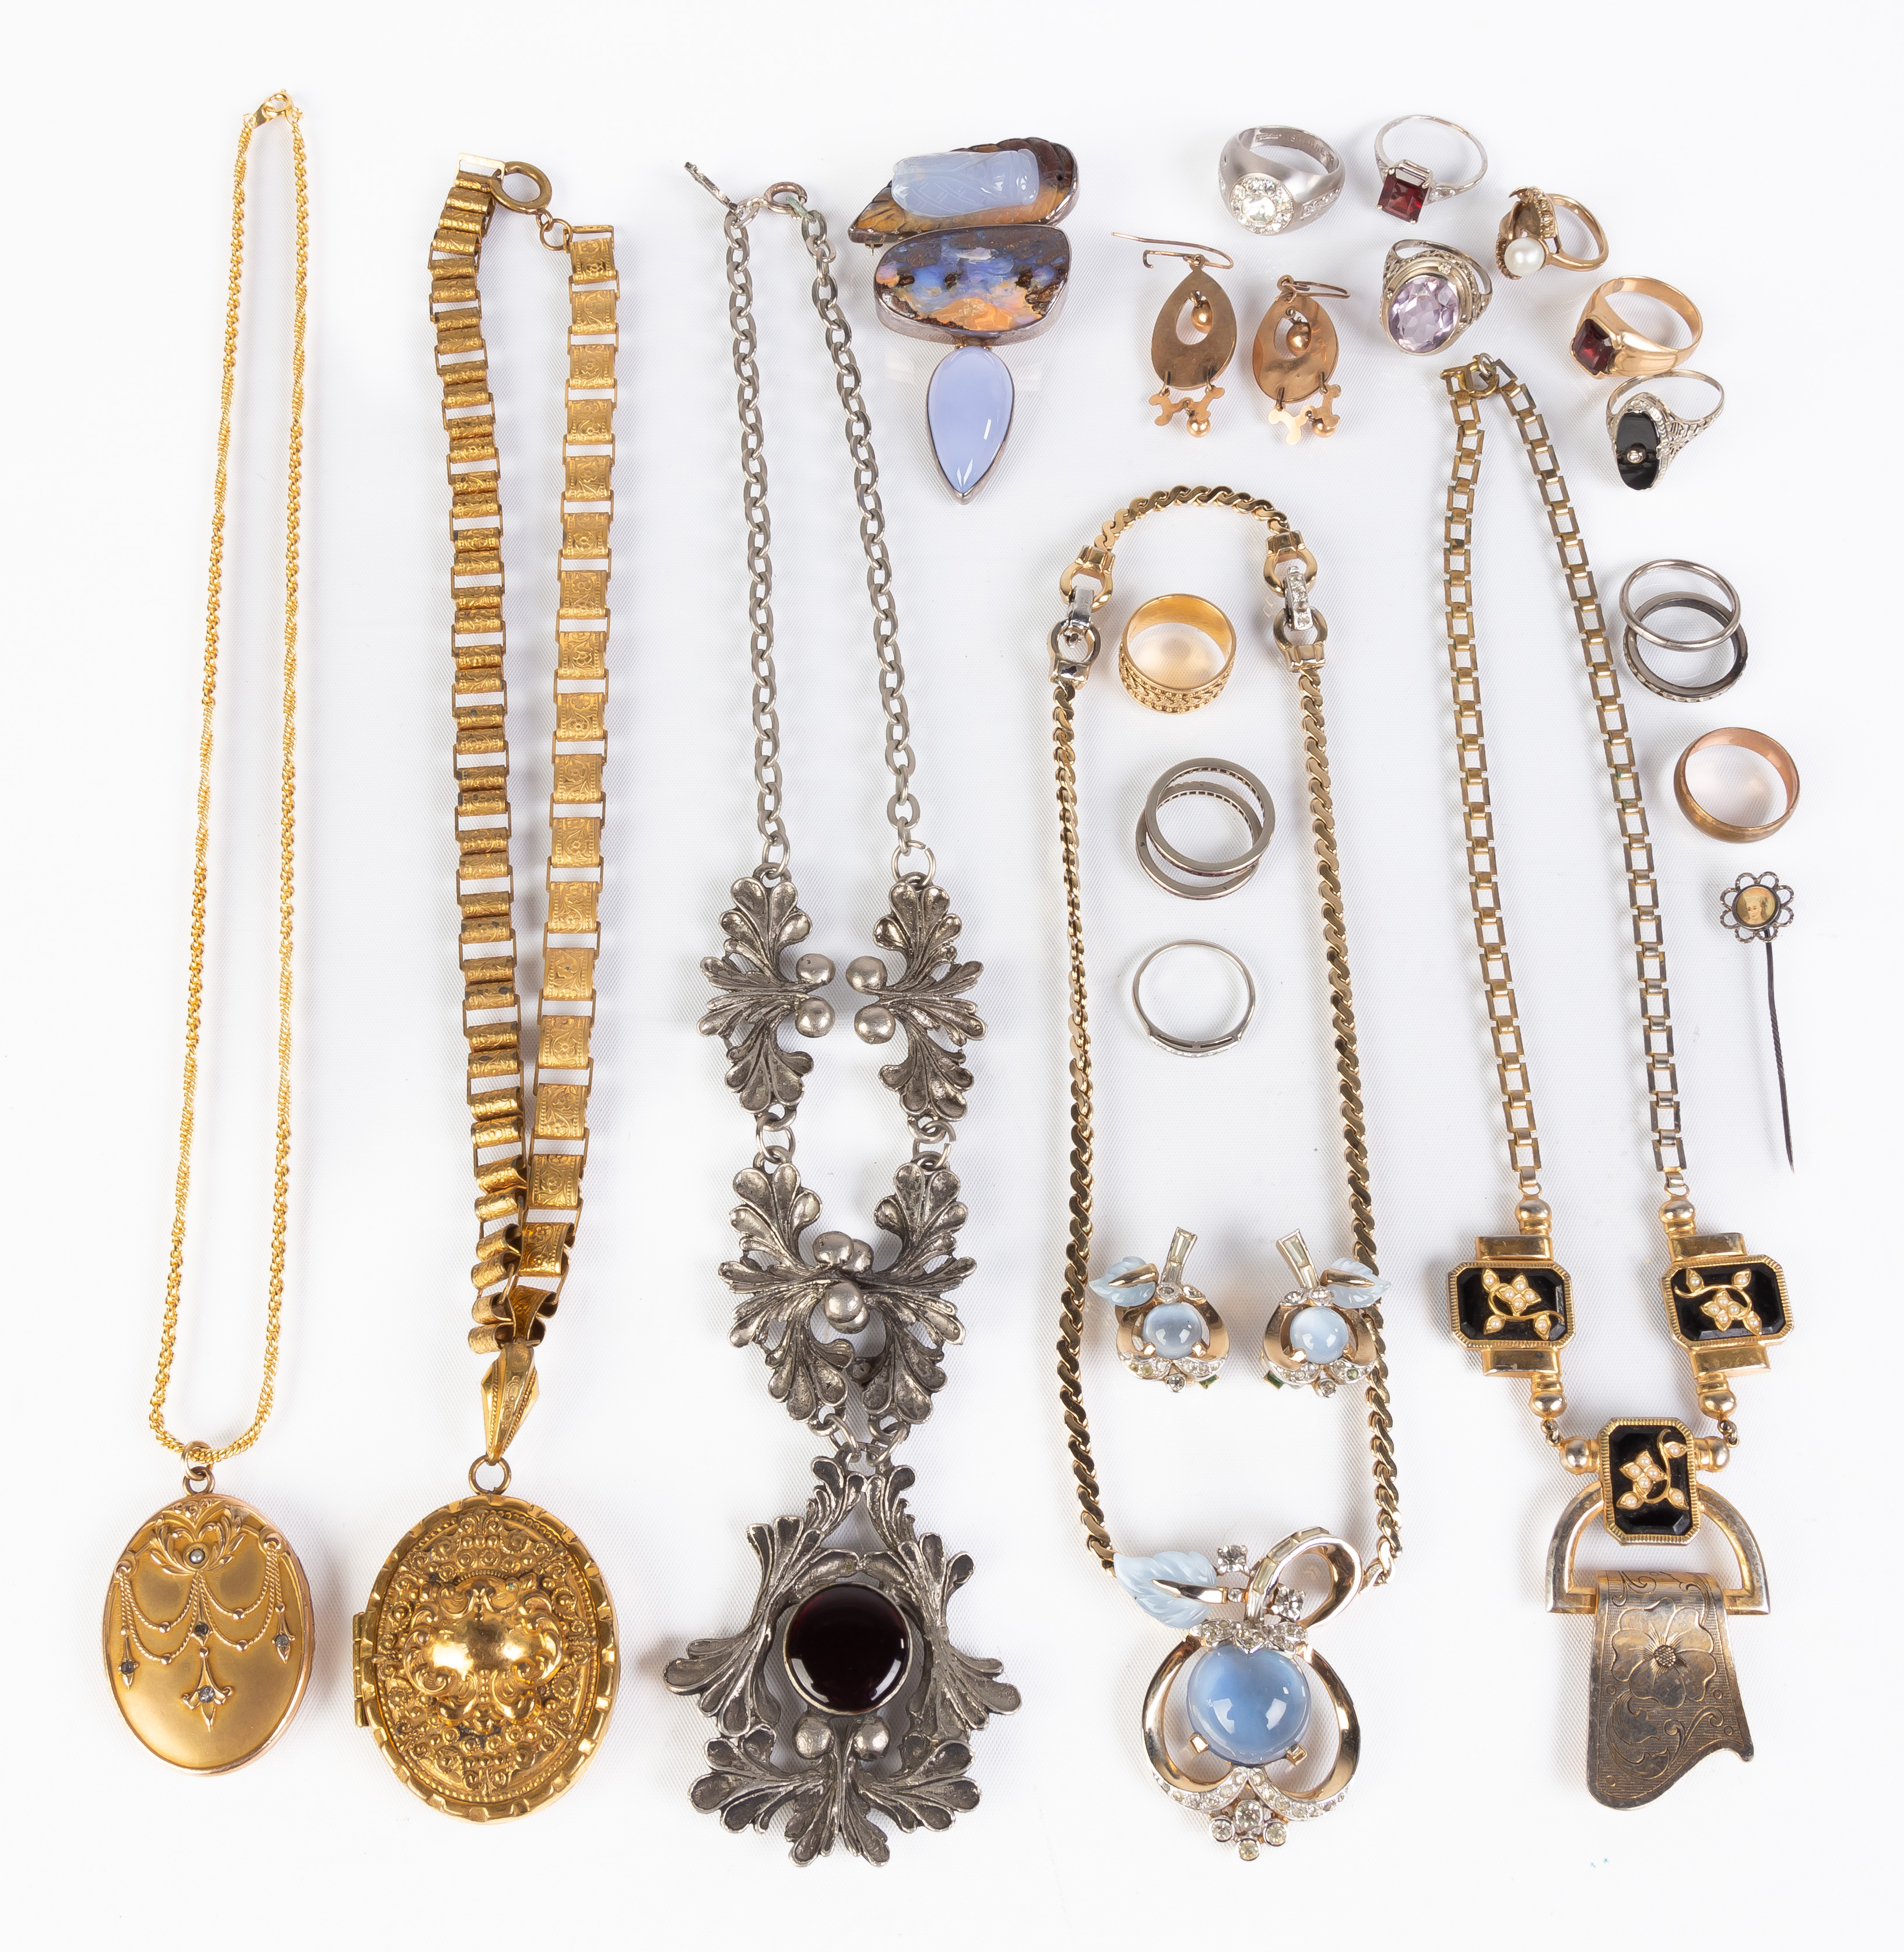 GROUP OF VINTAGE JEWELRY Group